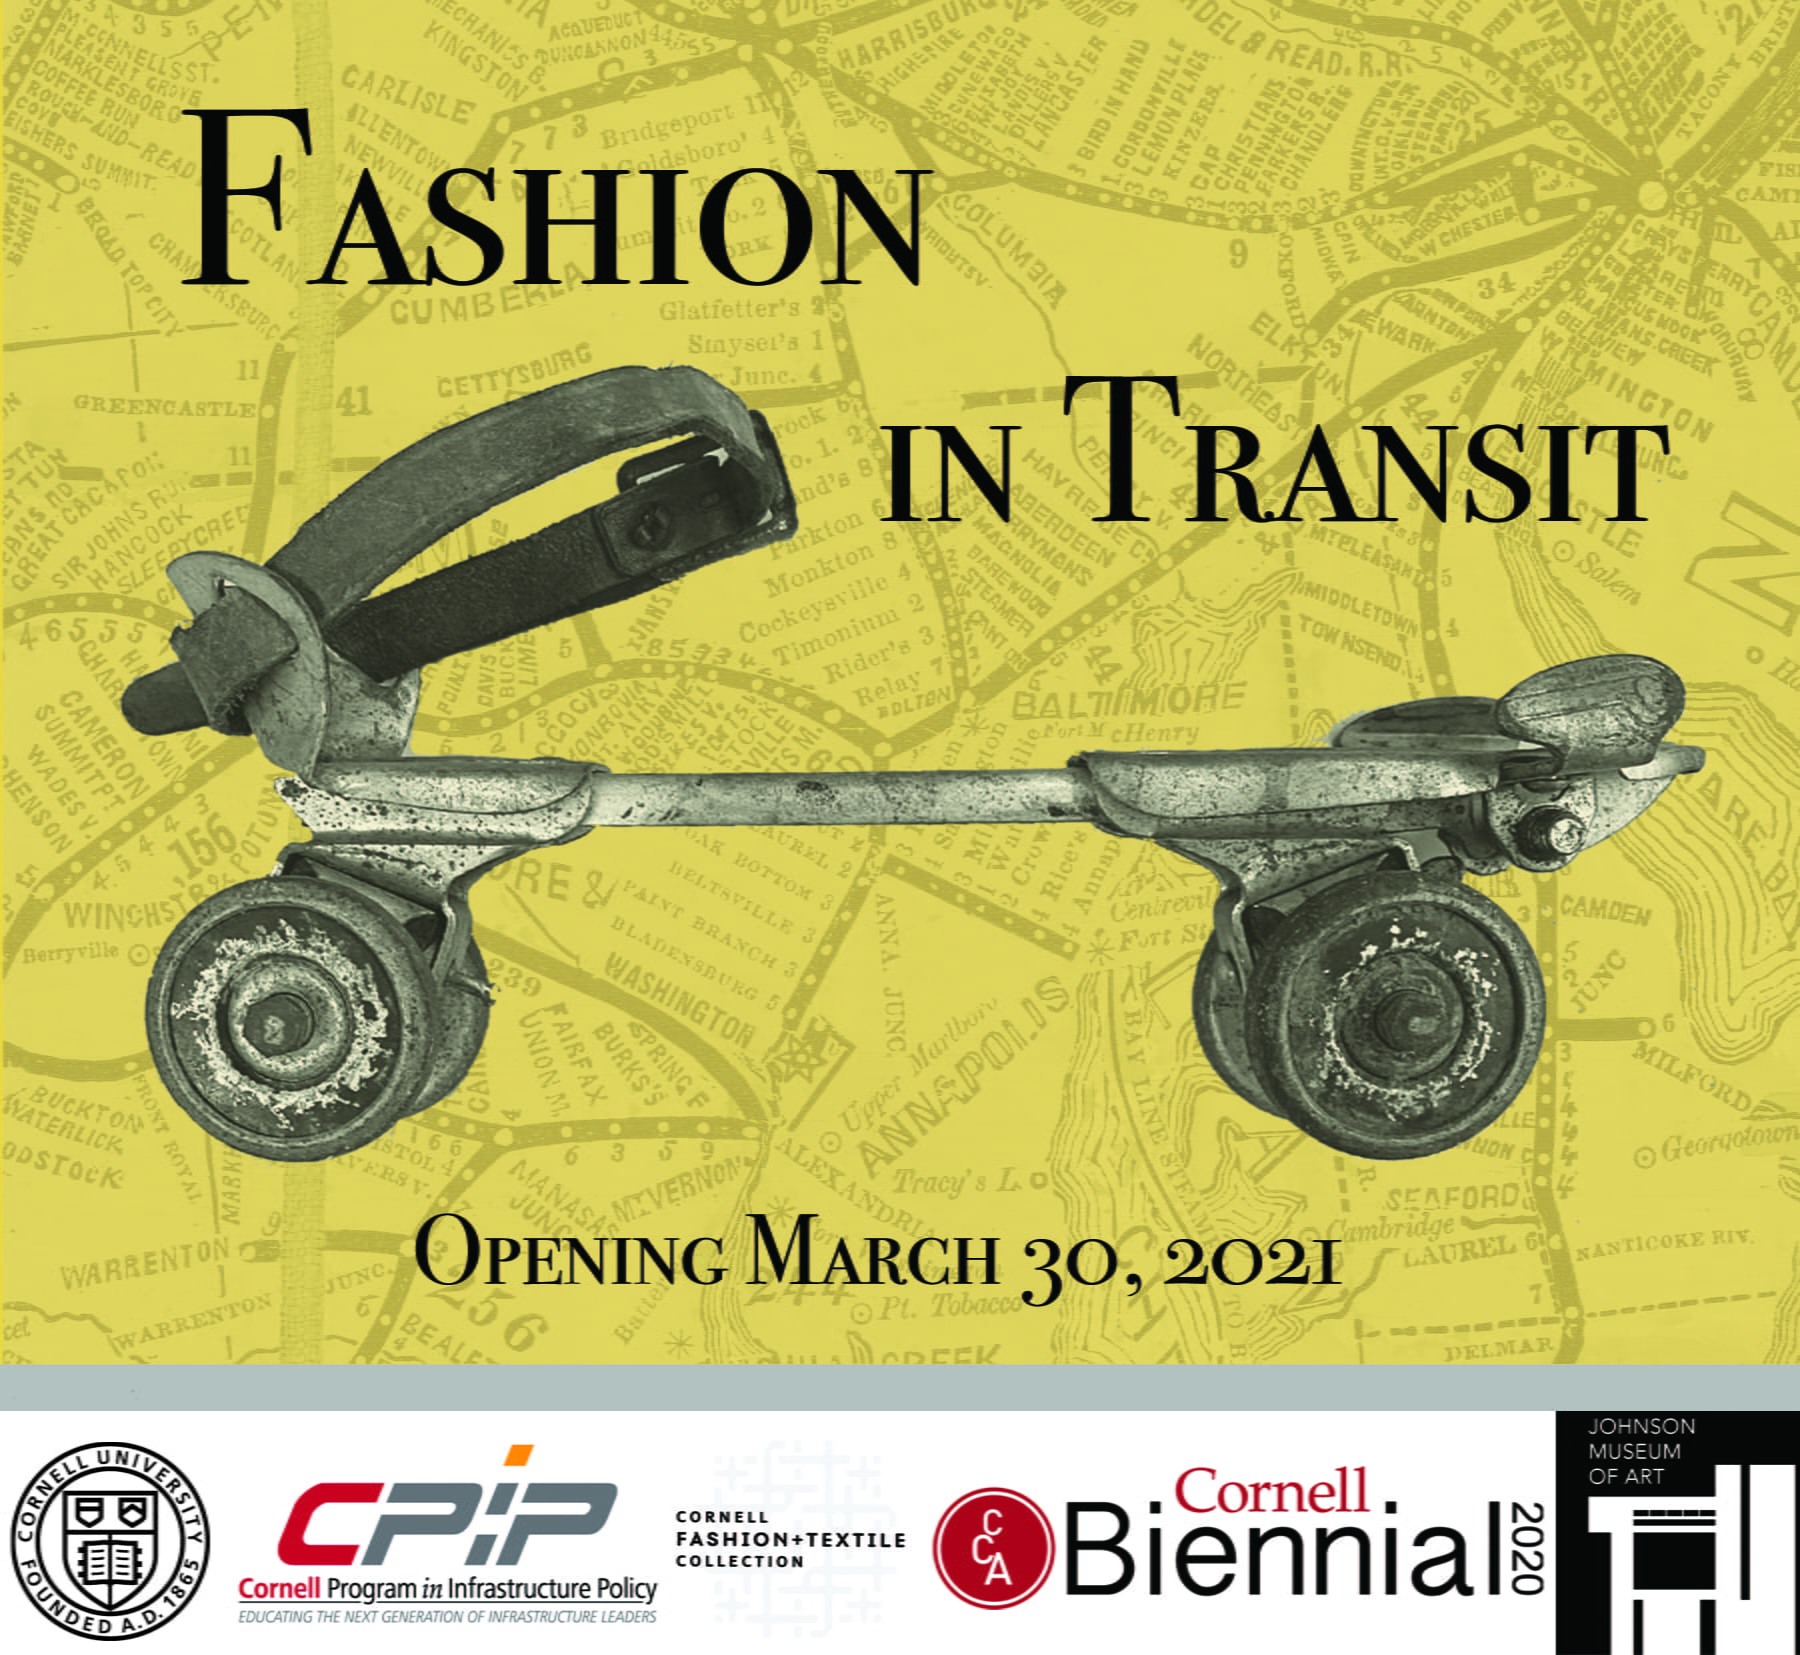 Roller skate with Fashion in Transit title and logos